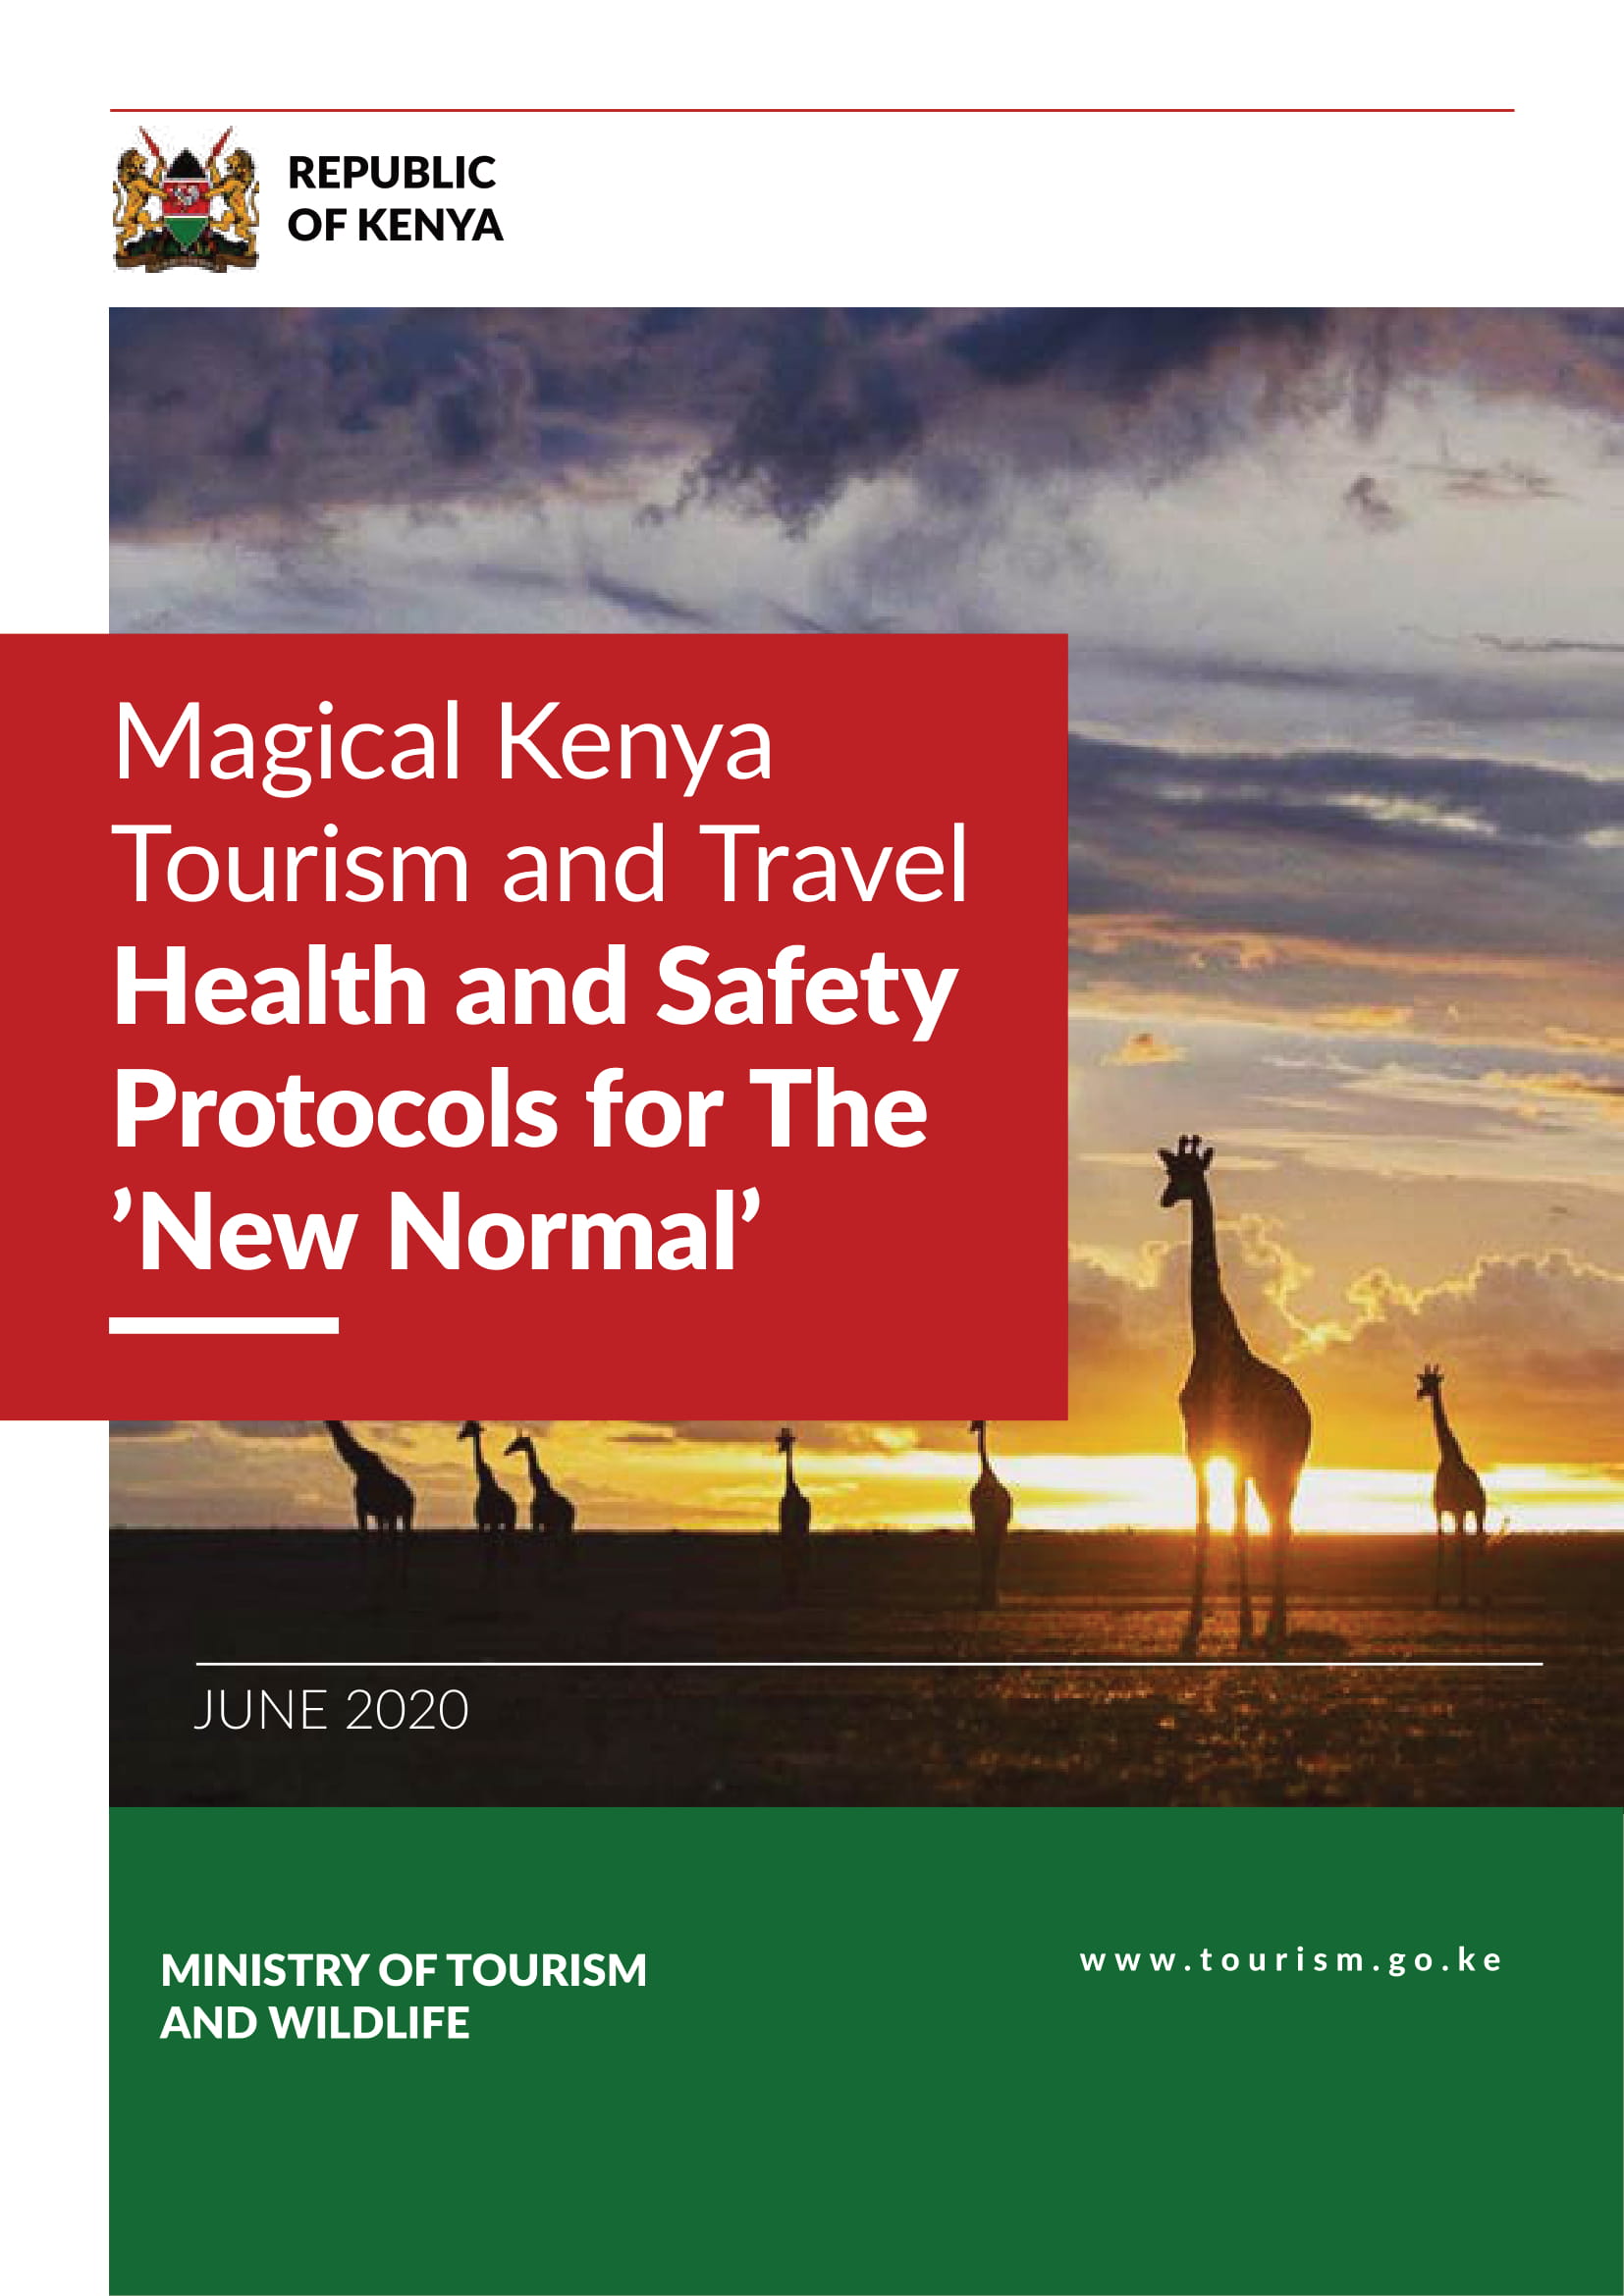 Magical Kenya Tourism amd Travel Health and Safety Protocol for 'The New Normal'